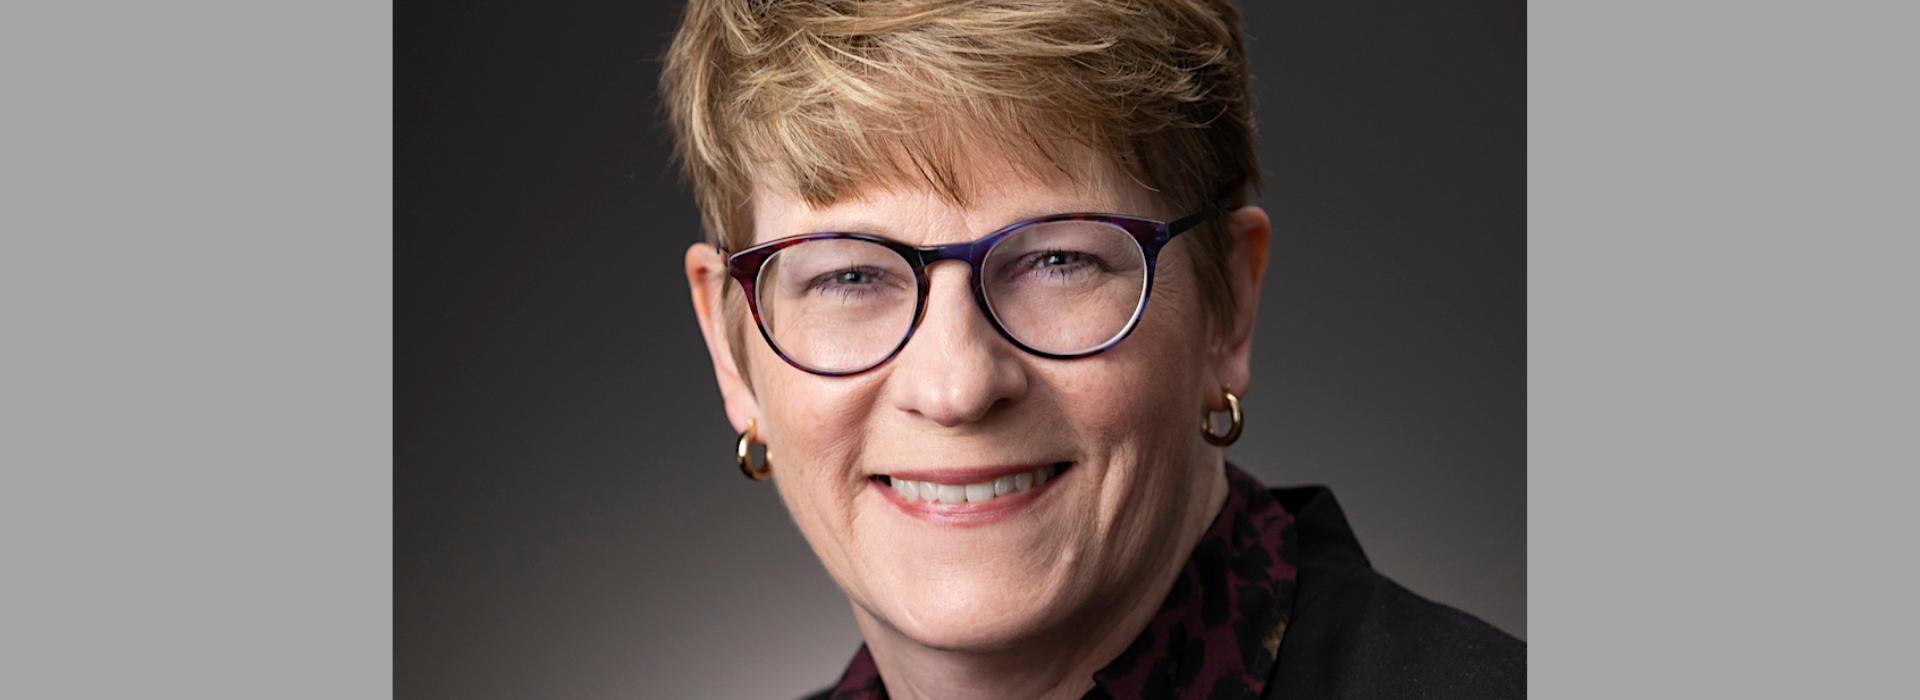 Dr. Paula Termuhlen to Leave Role as Regional Dean of the Duluth Campus